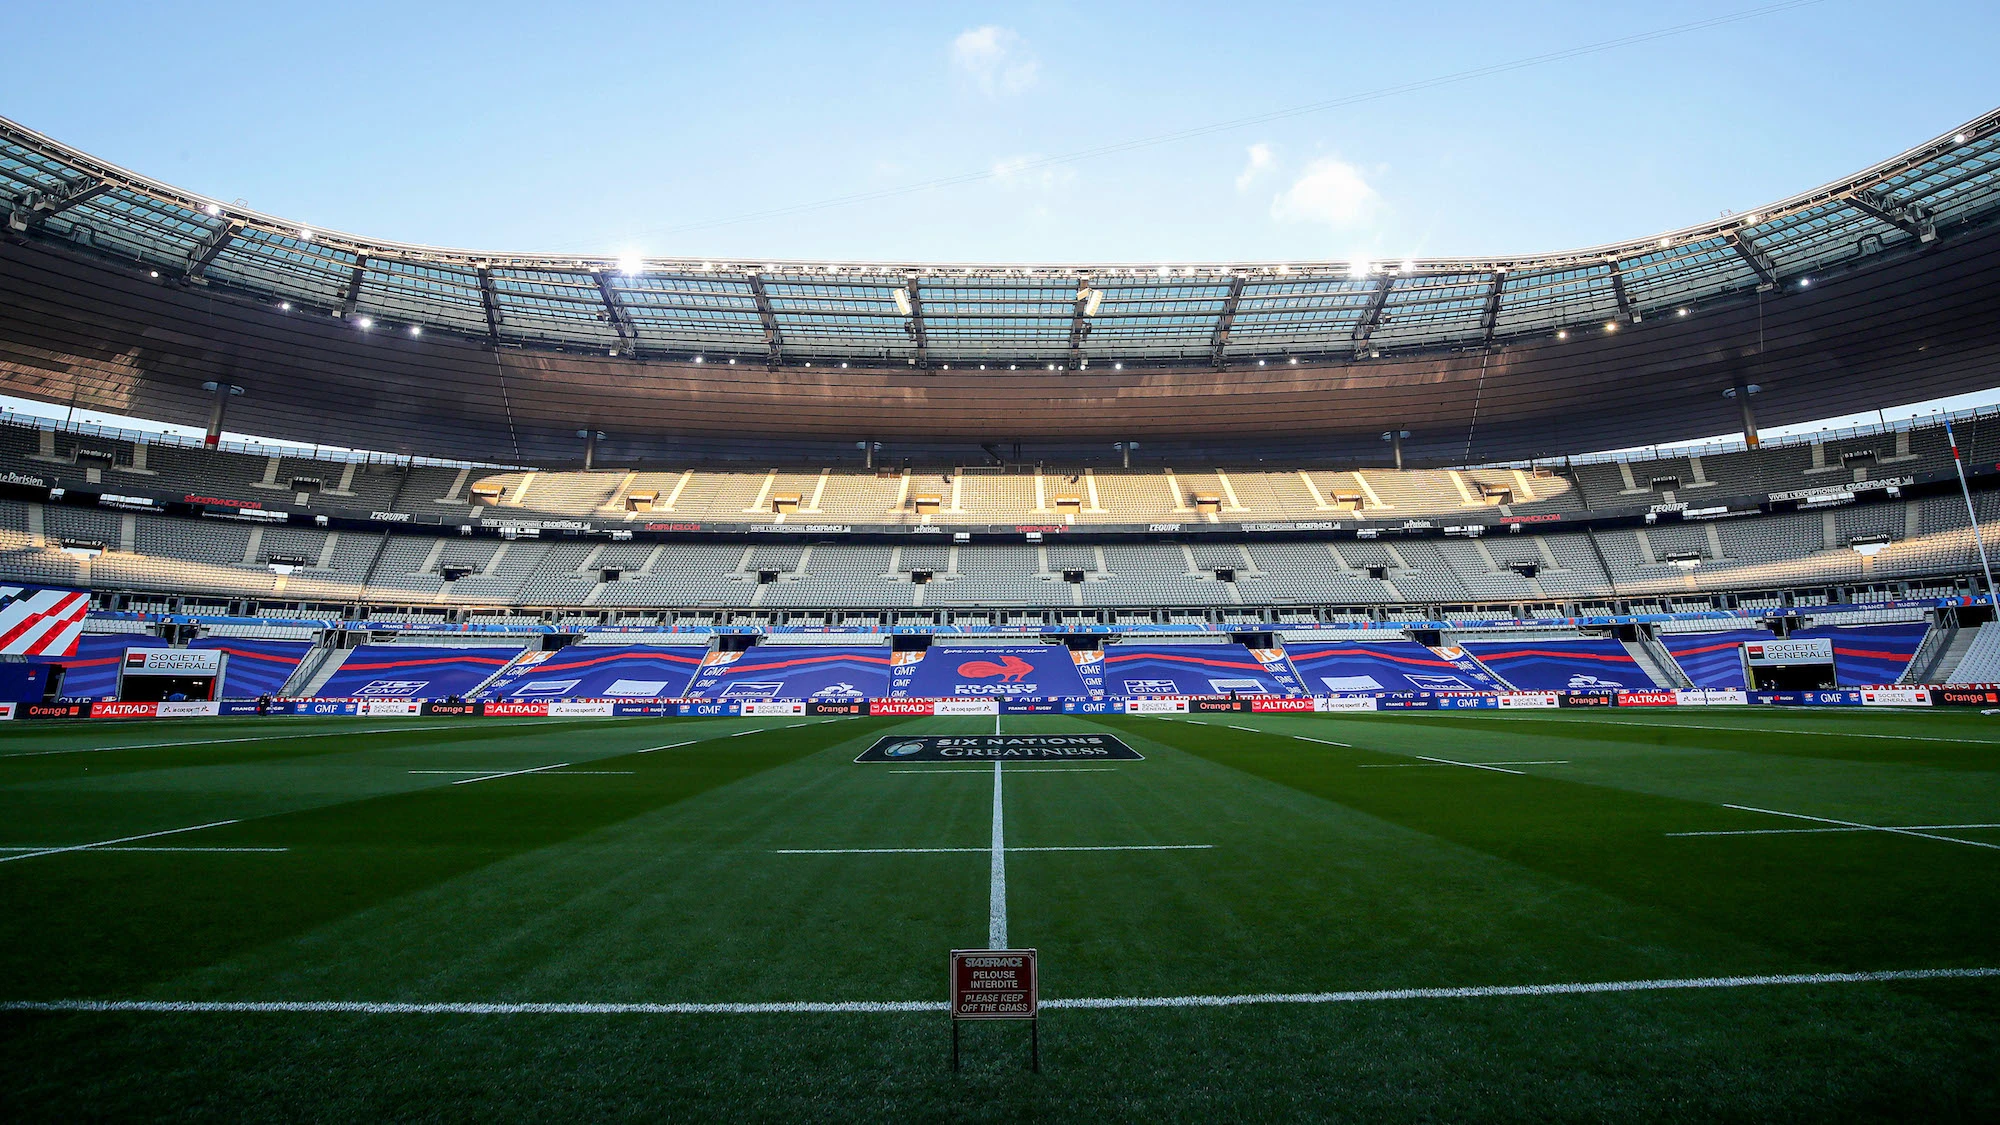 A general view of Stade de France ahead of the game 20/3/2021